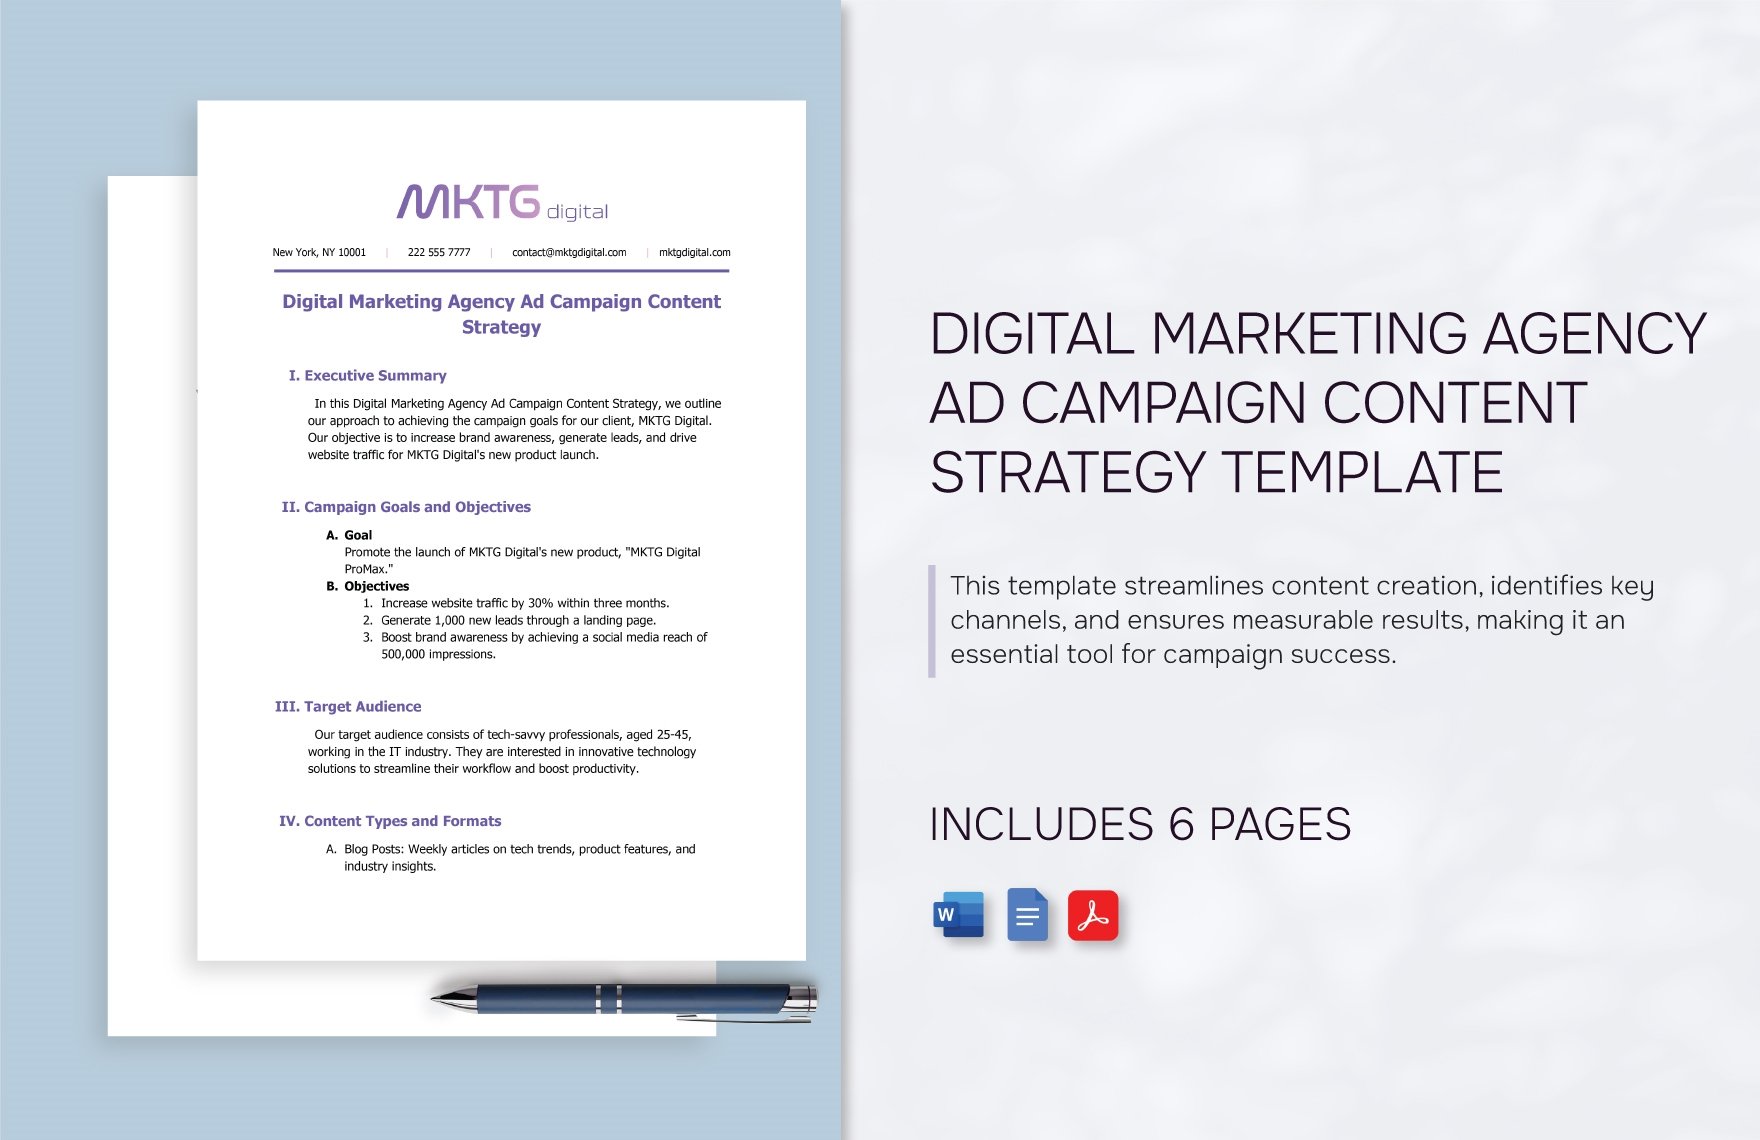 Digital Marketing Agency Ad Campaign Content Strategy Template